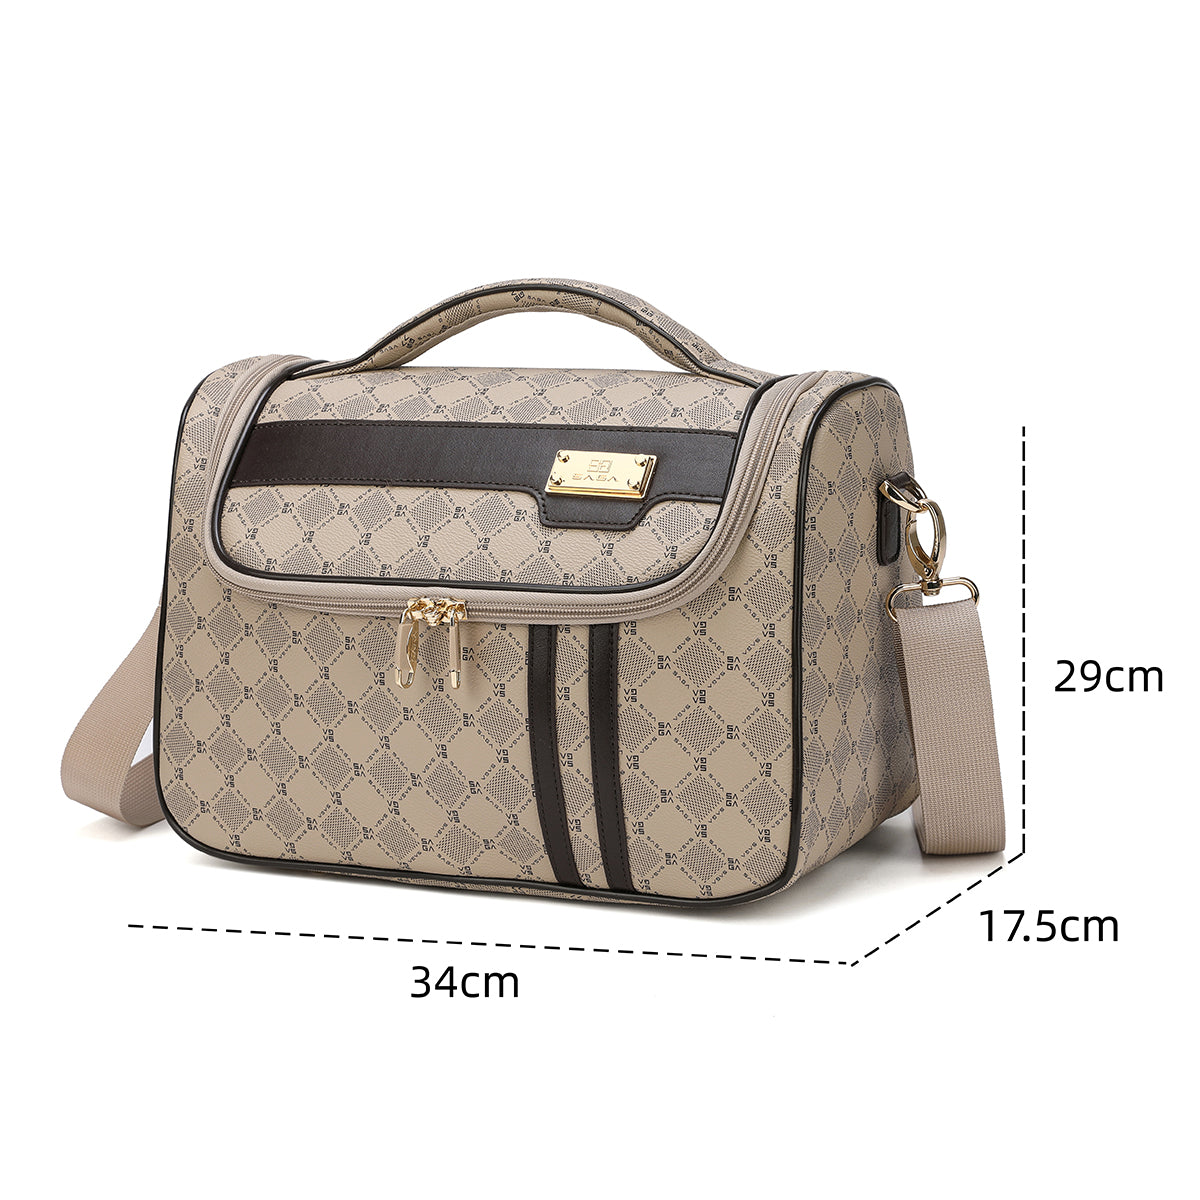 Luxurious travel bag in several sizes in khaki color